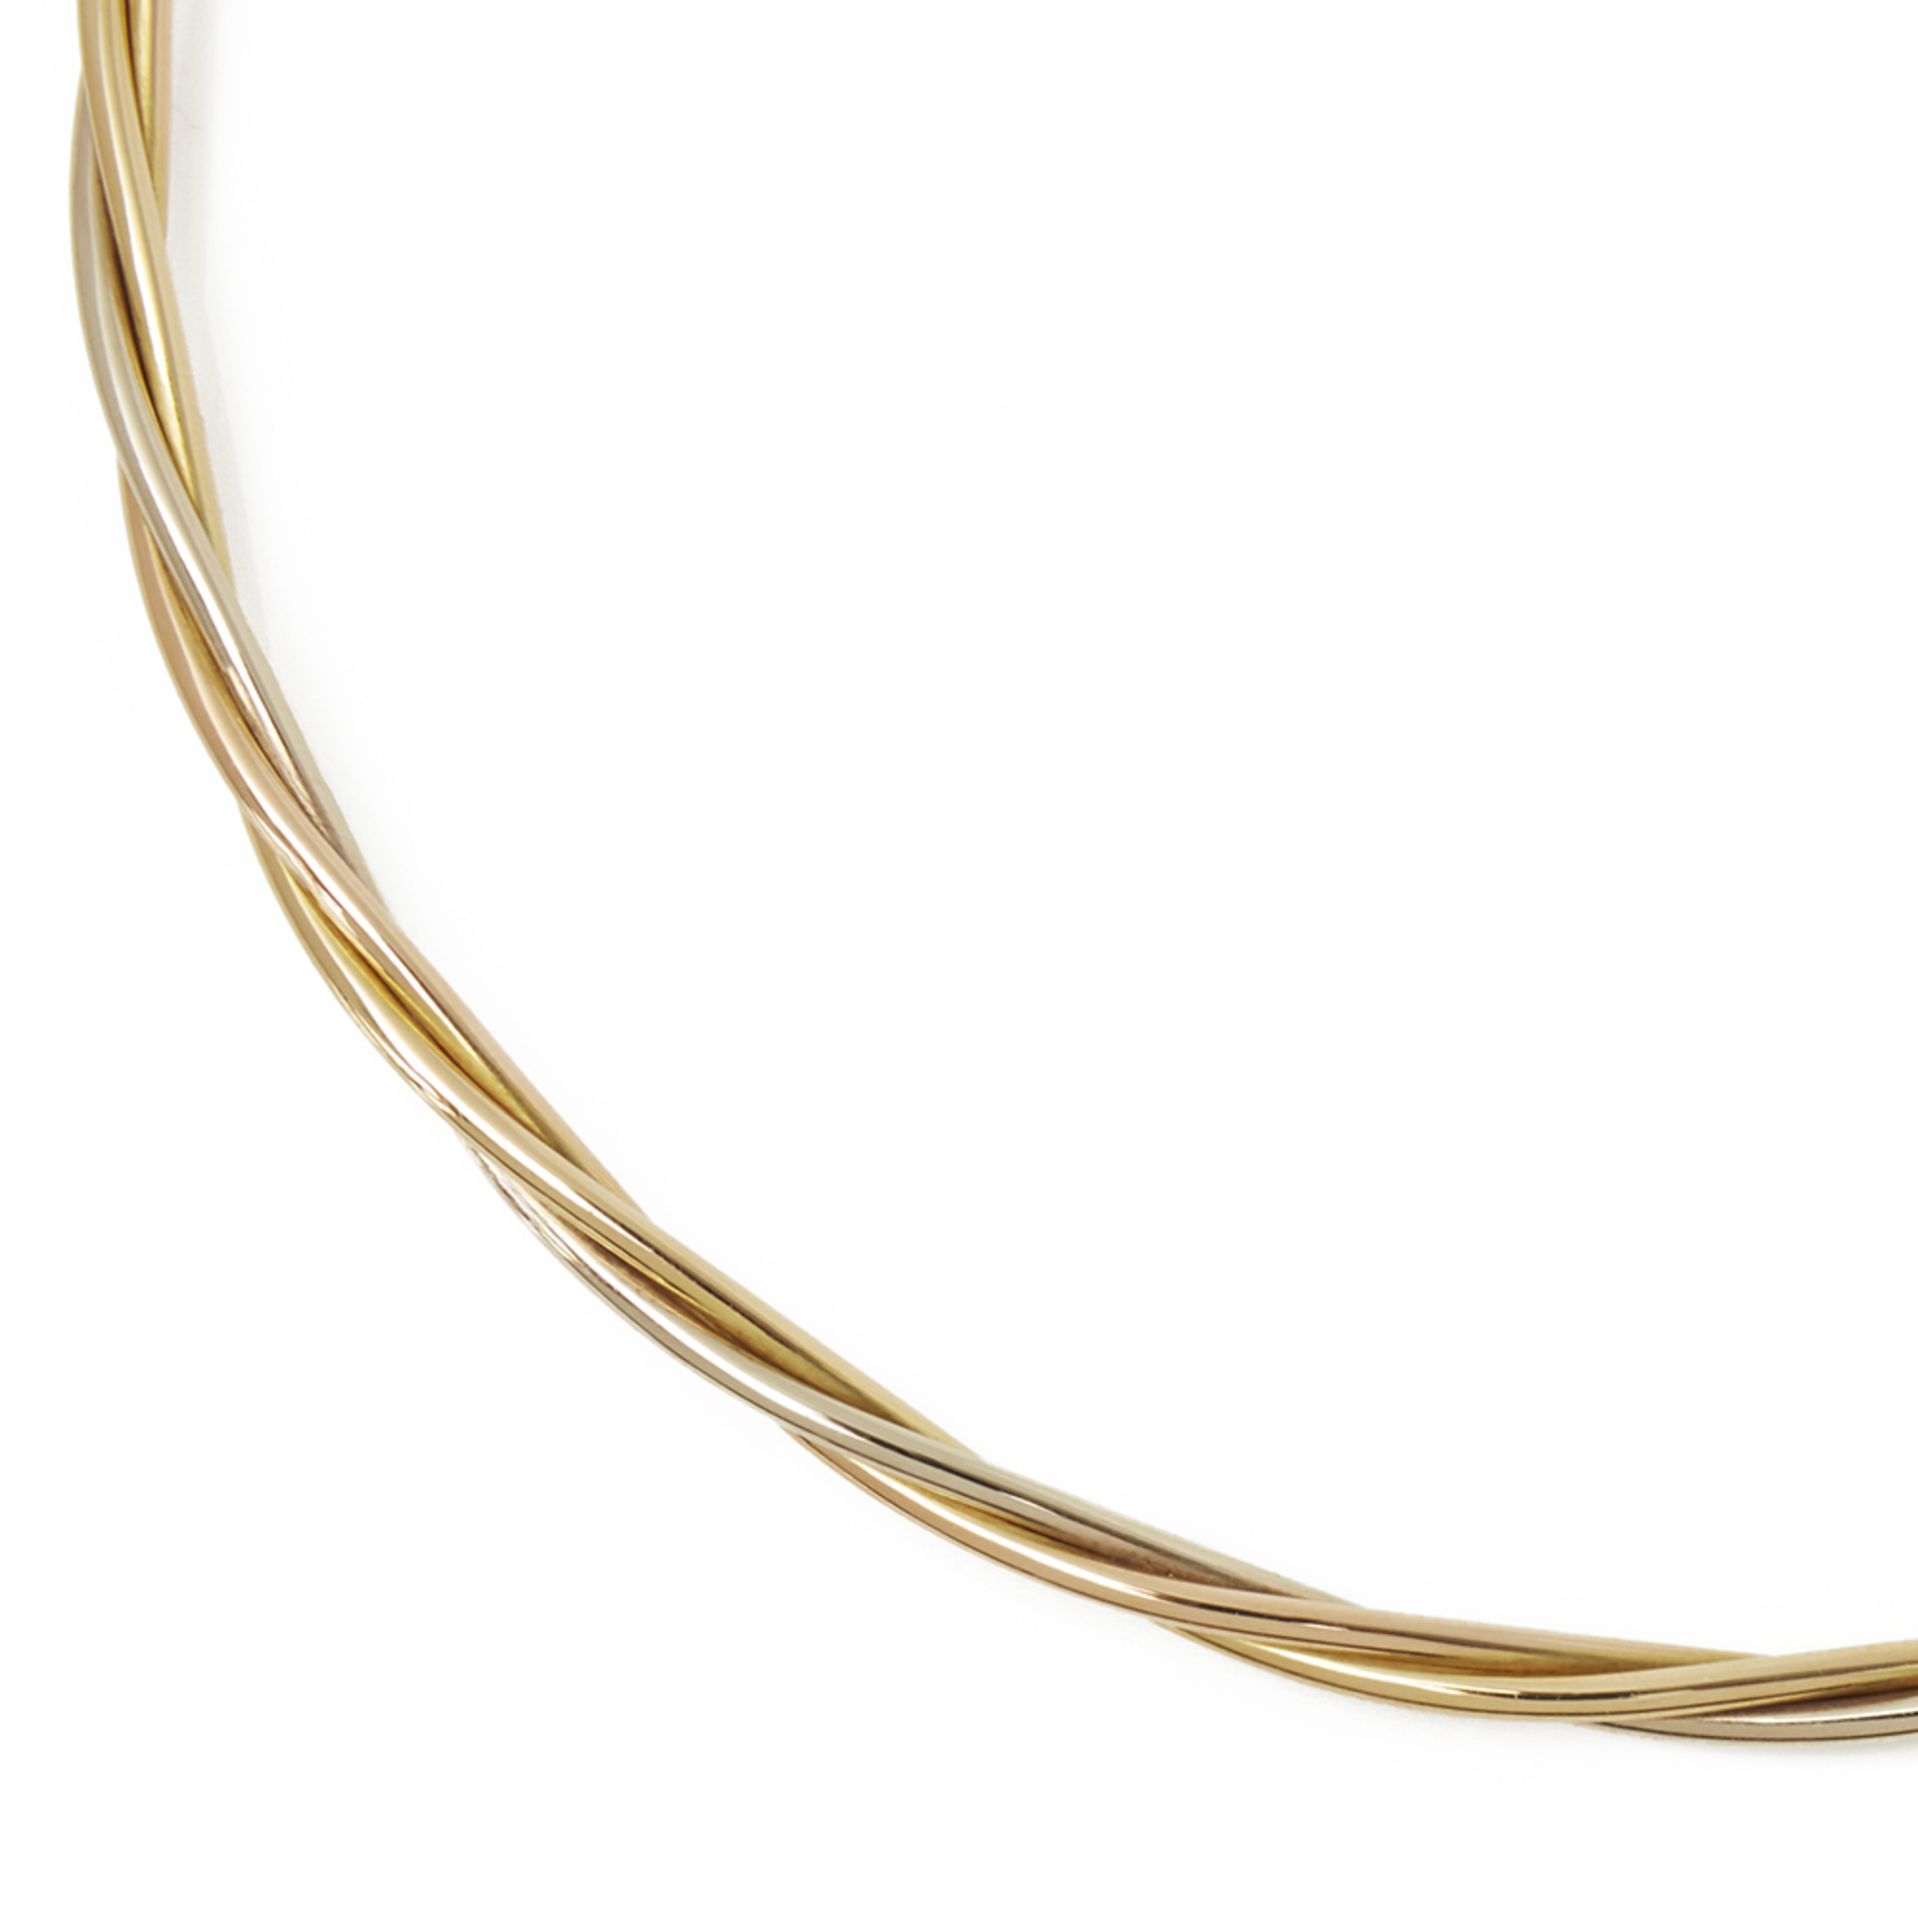 Cartier 18k Yellow, White & Rose Gold Twist Design Necklace - Image 6 of 6